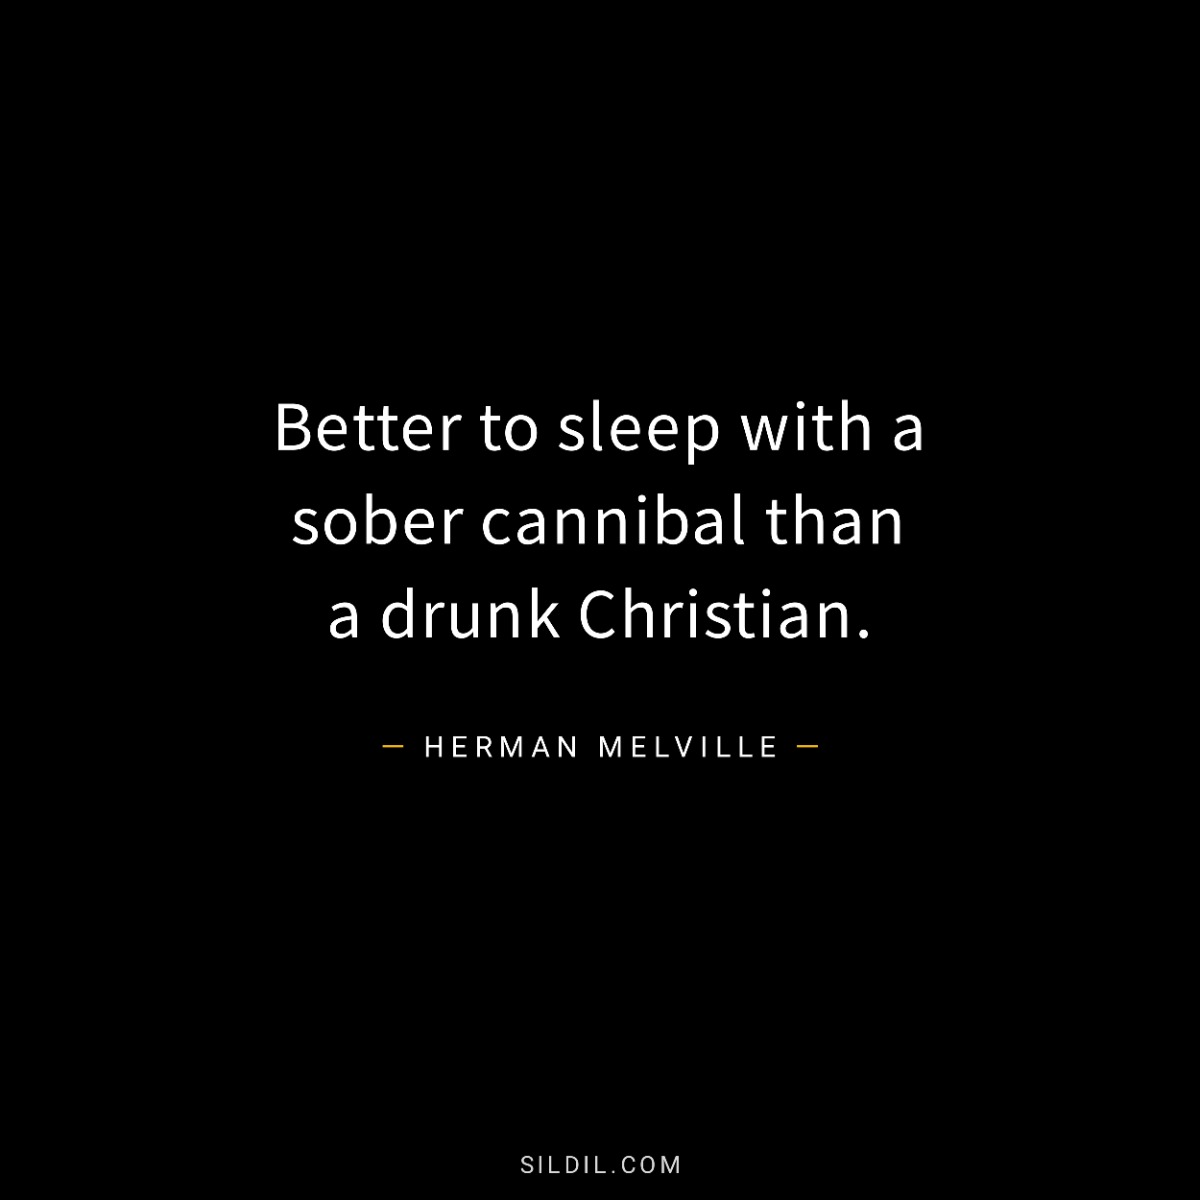 Better to sleep with a sober cannibal than a drunk Christian.